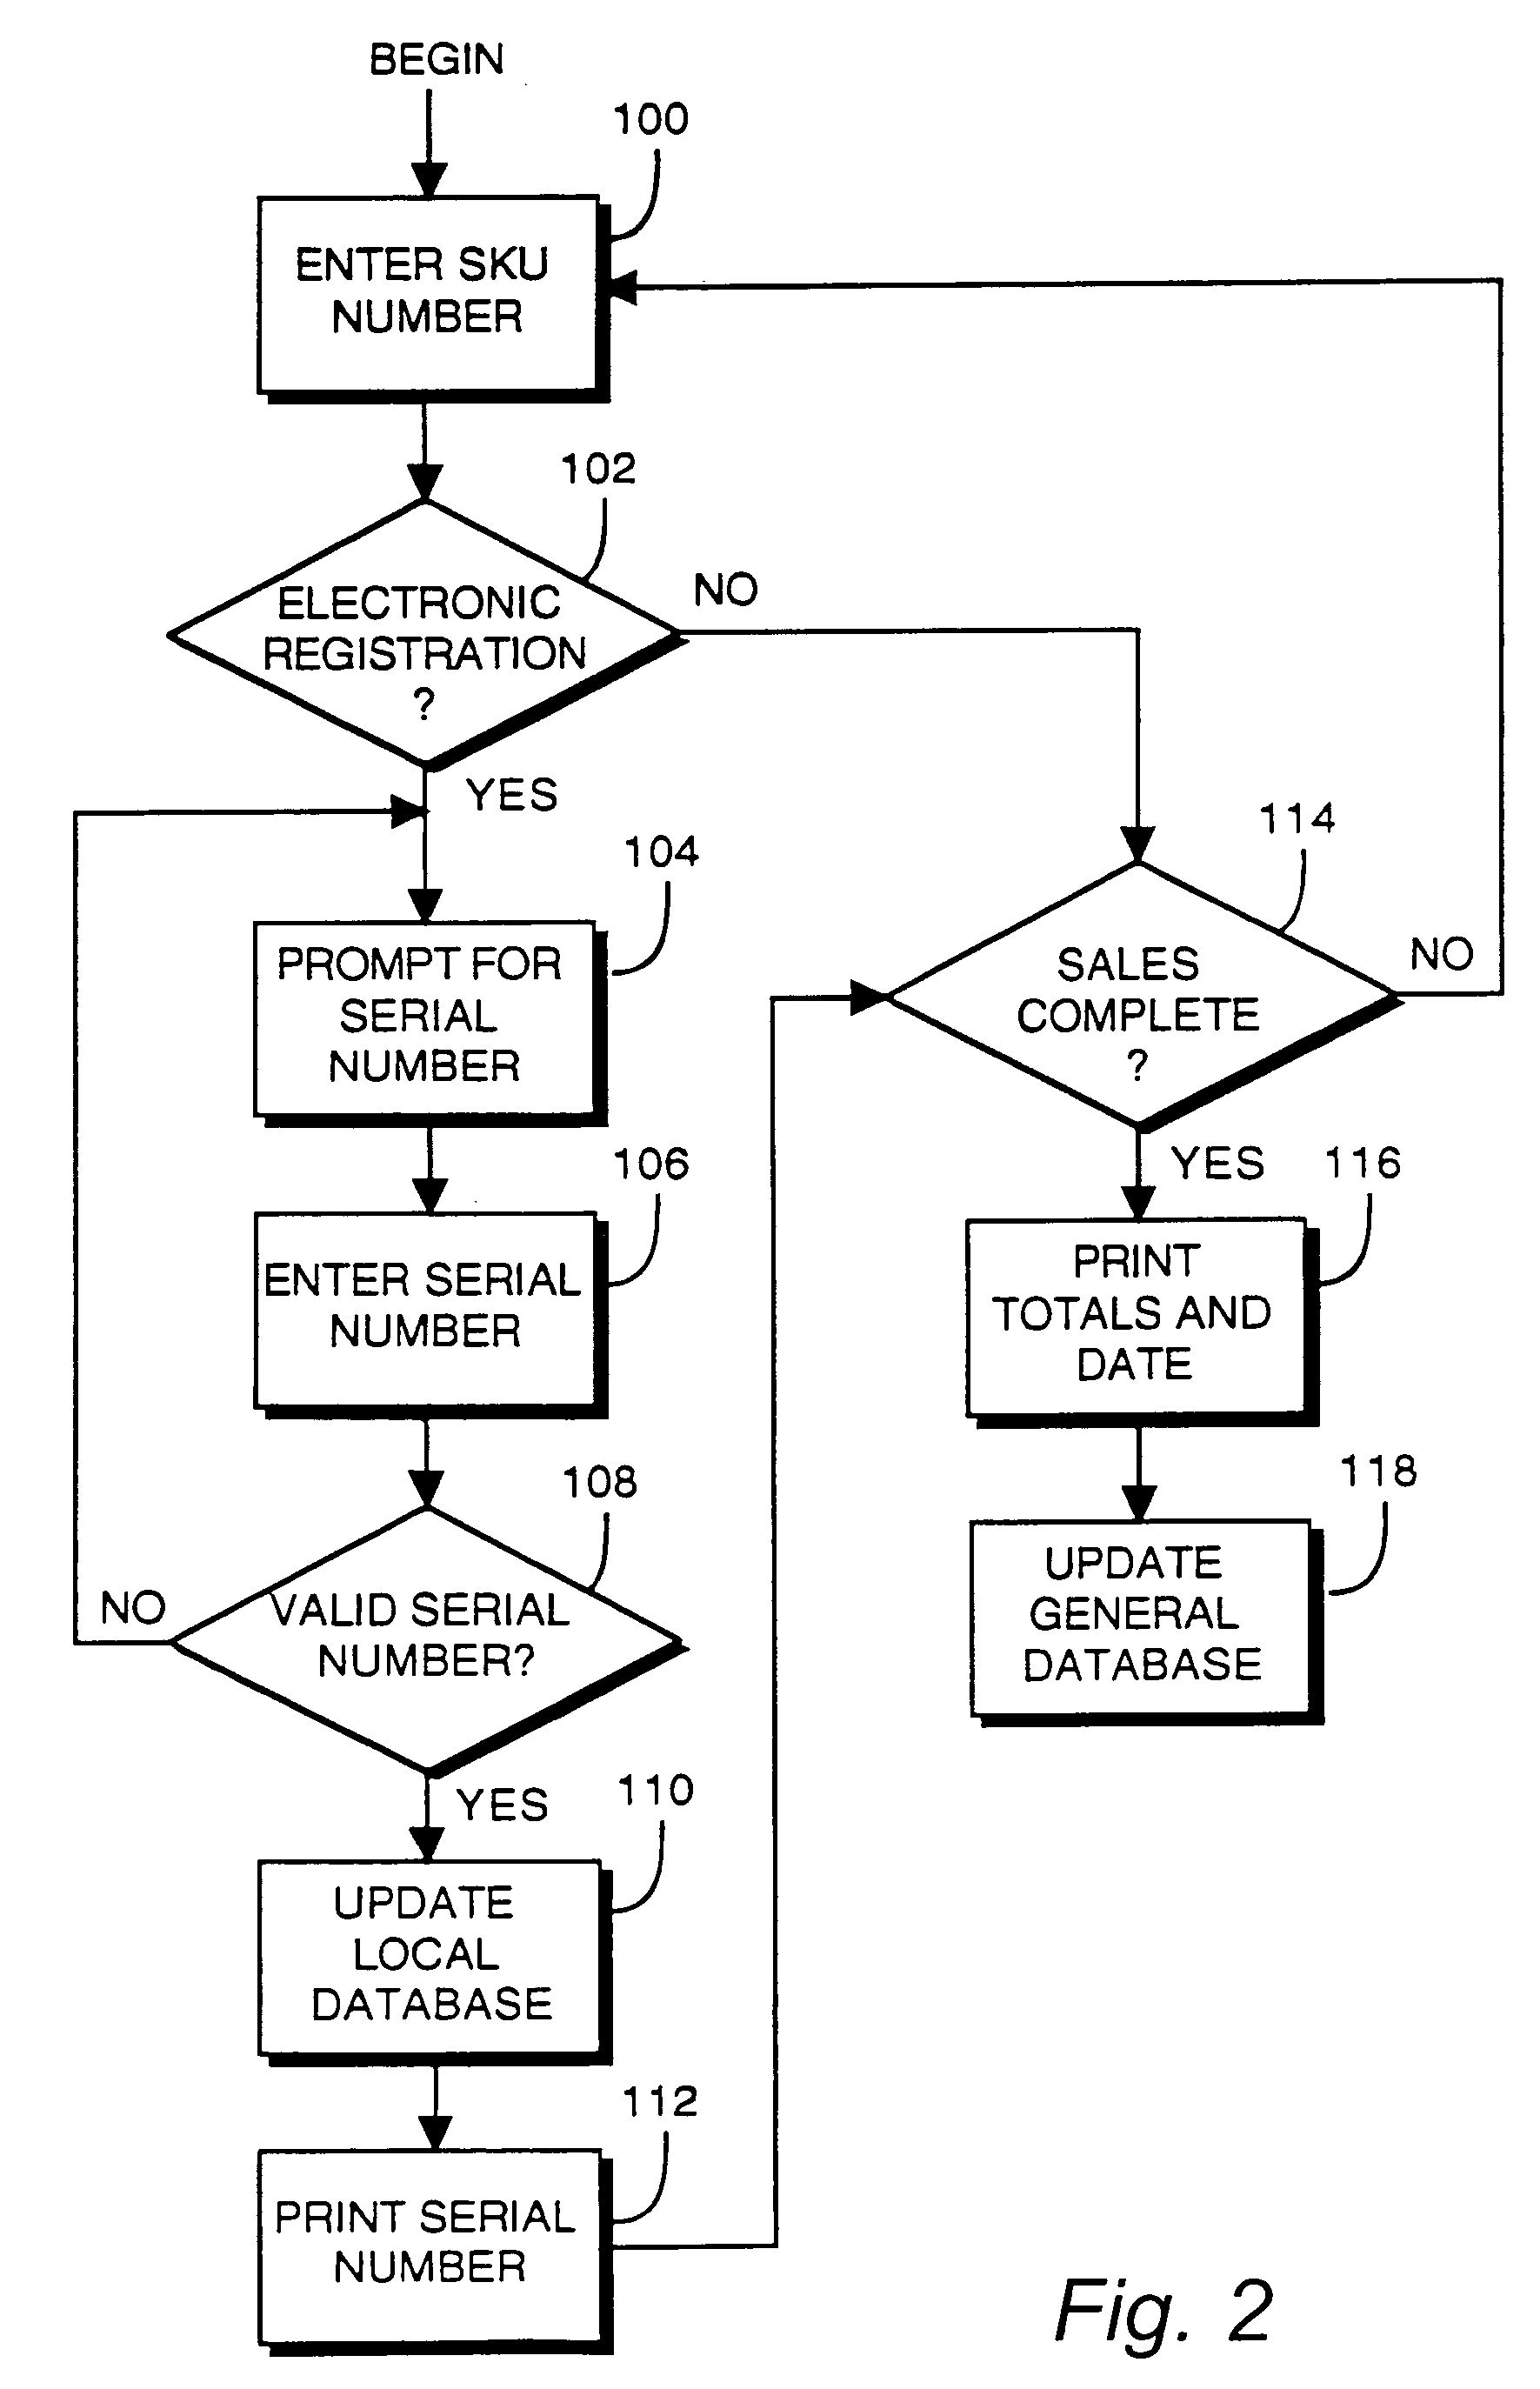 Method and apparatus for fraud reduction and product recovery